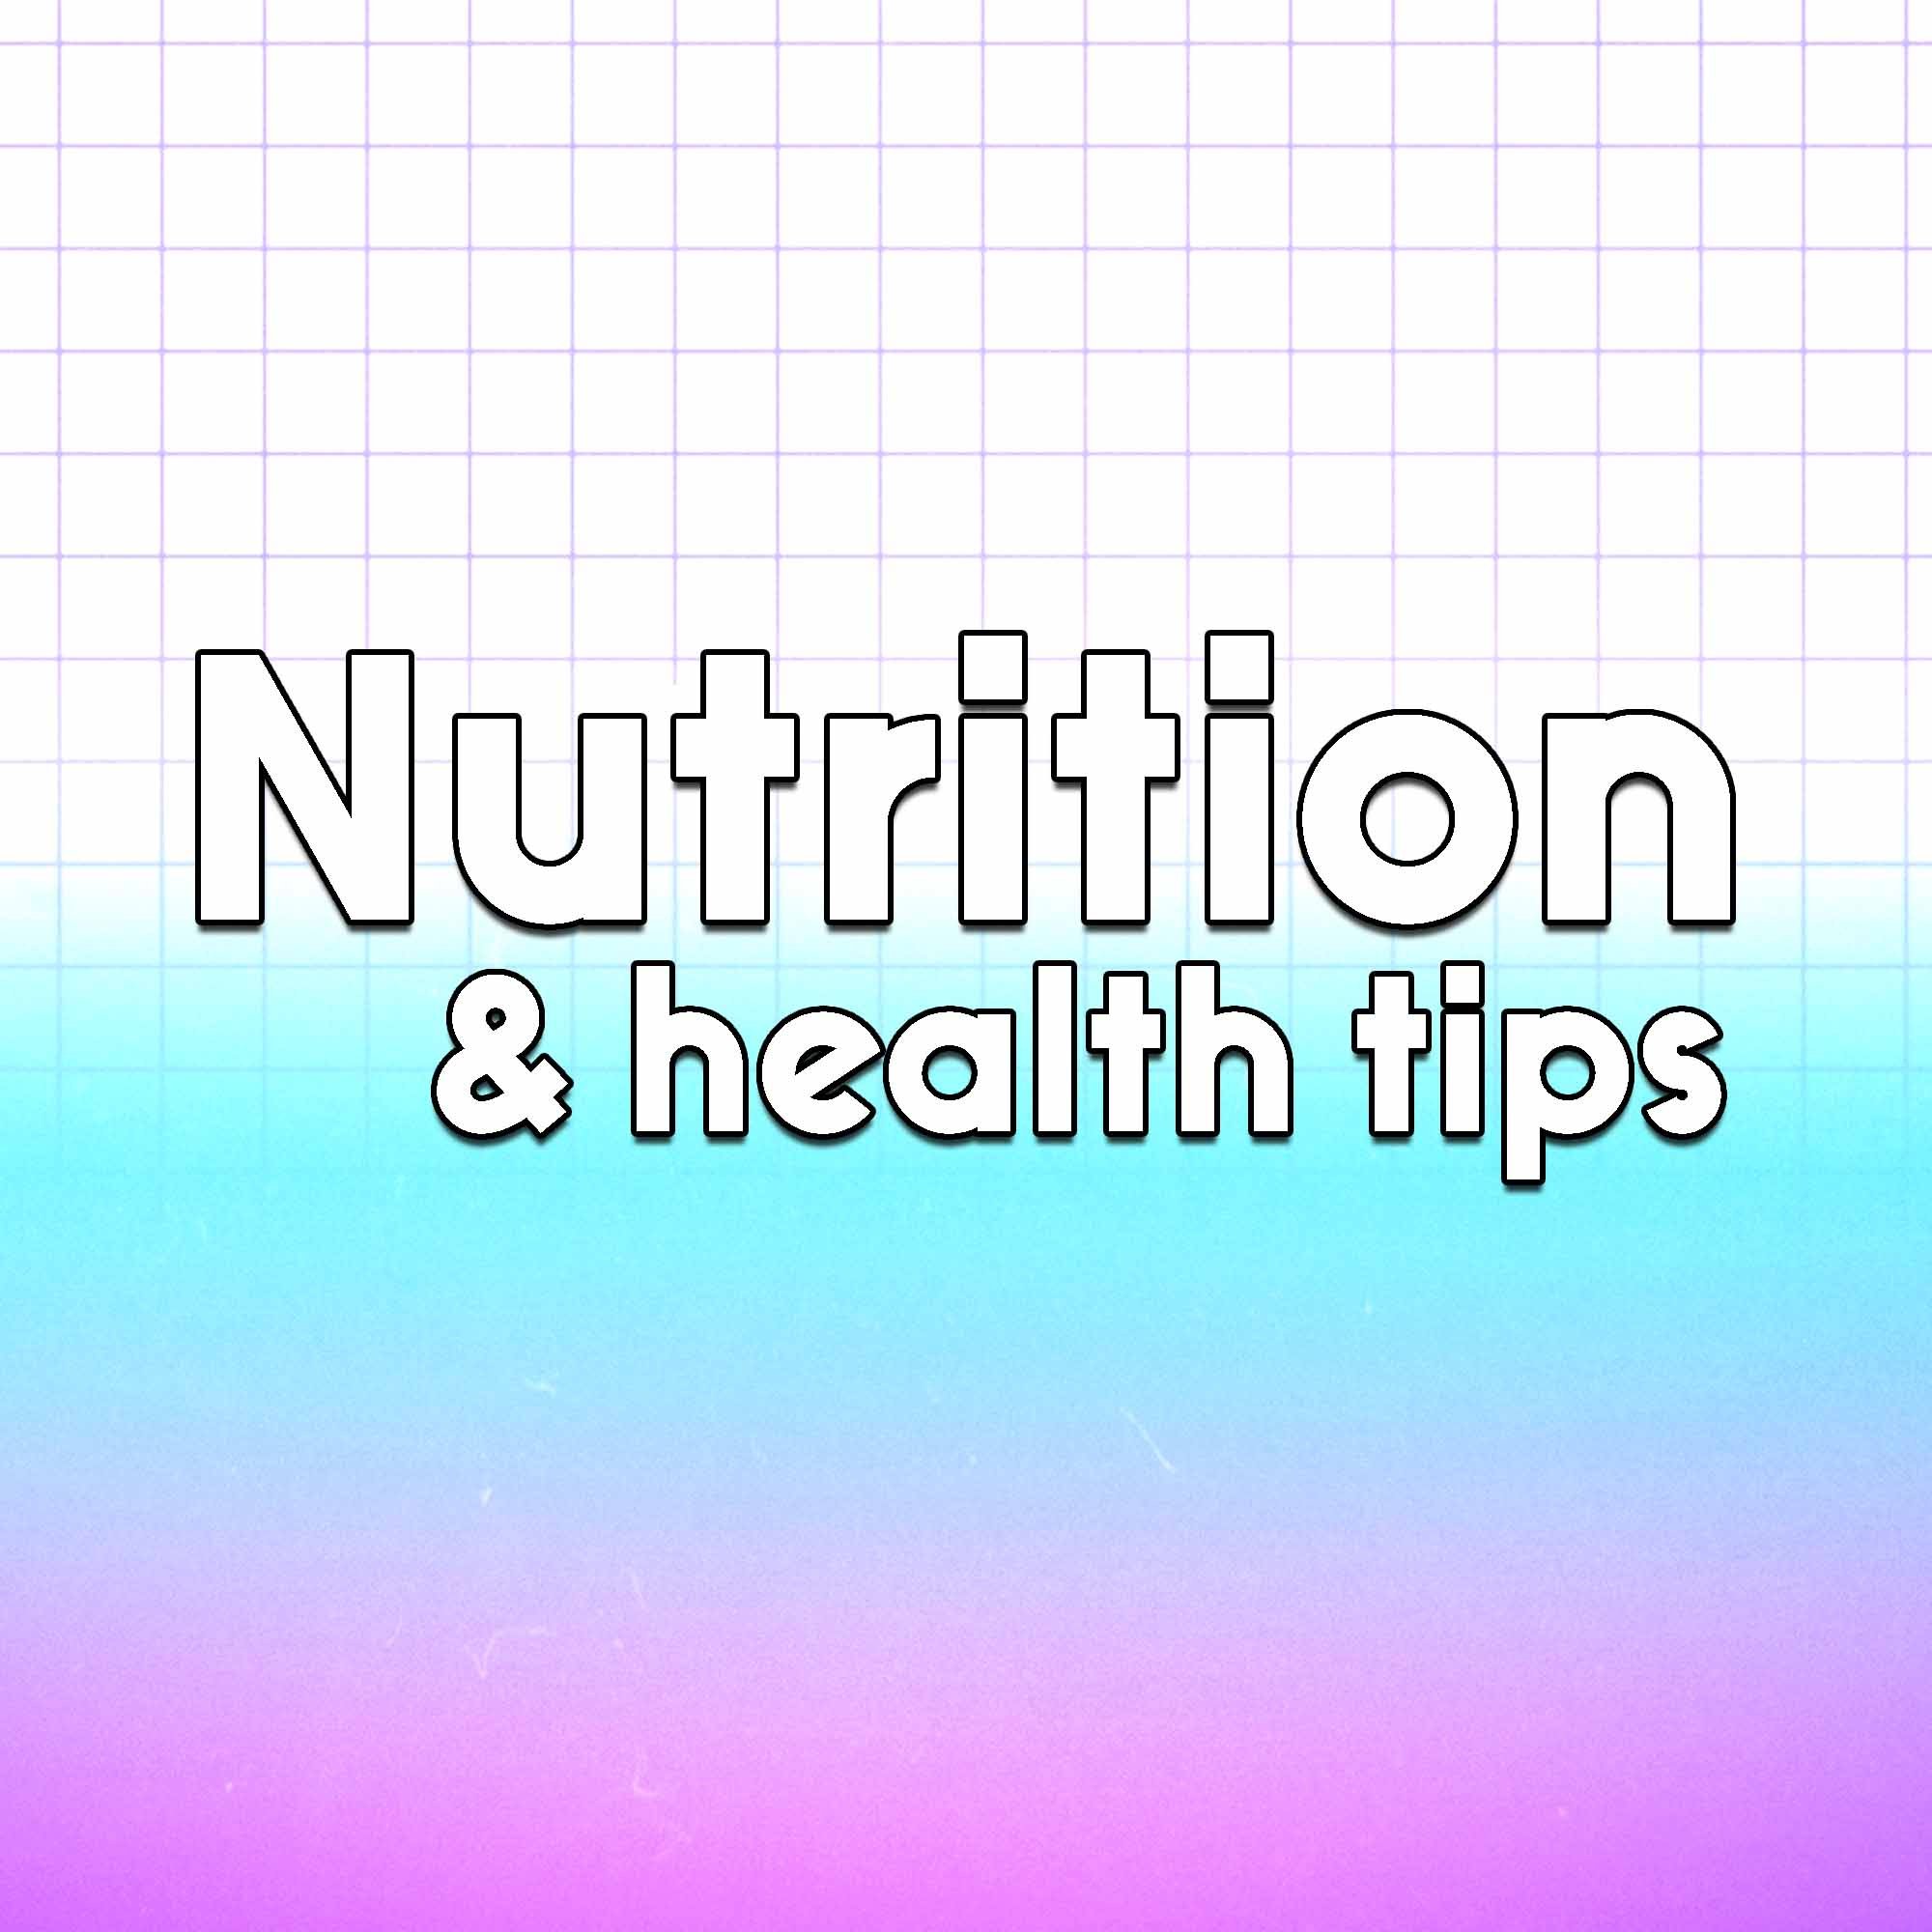 Blog categories - nutrition and health tips-min.jpg